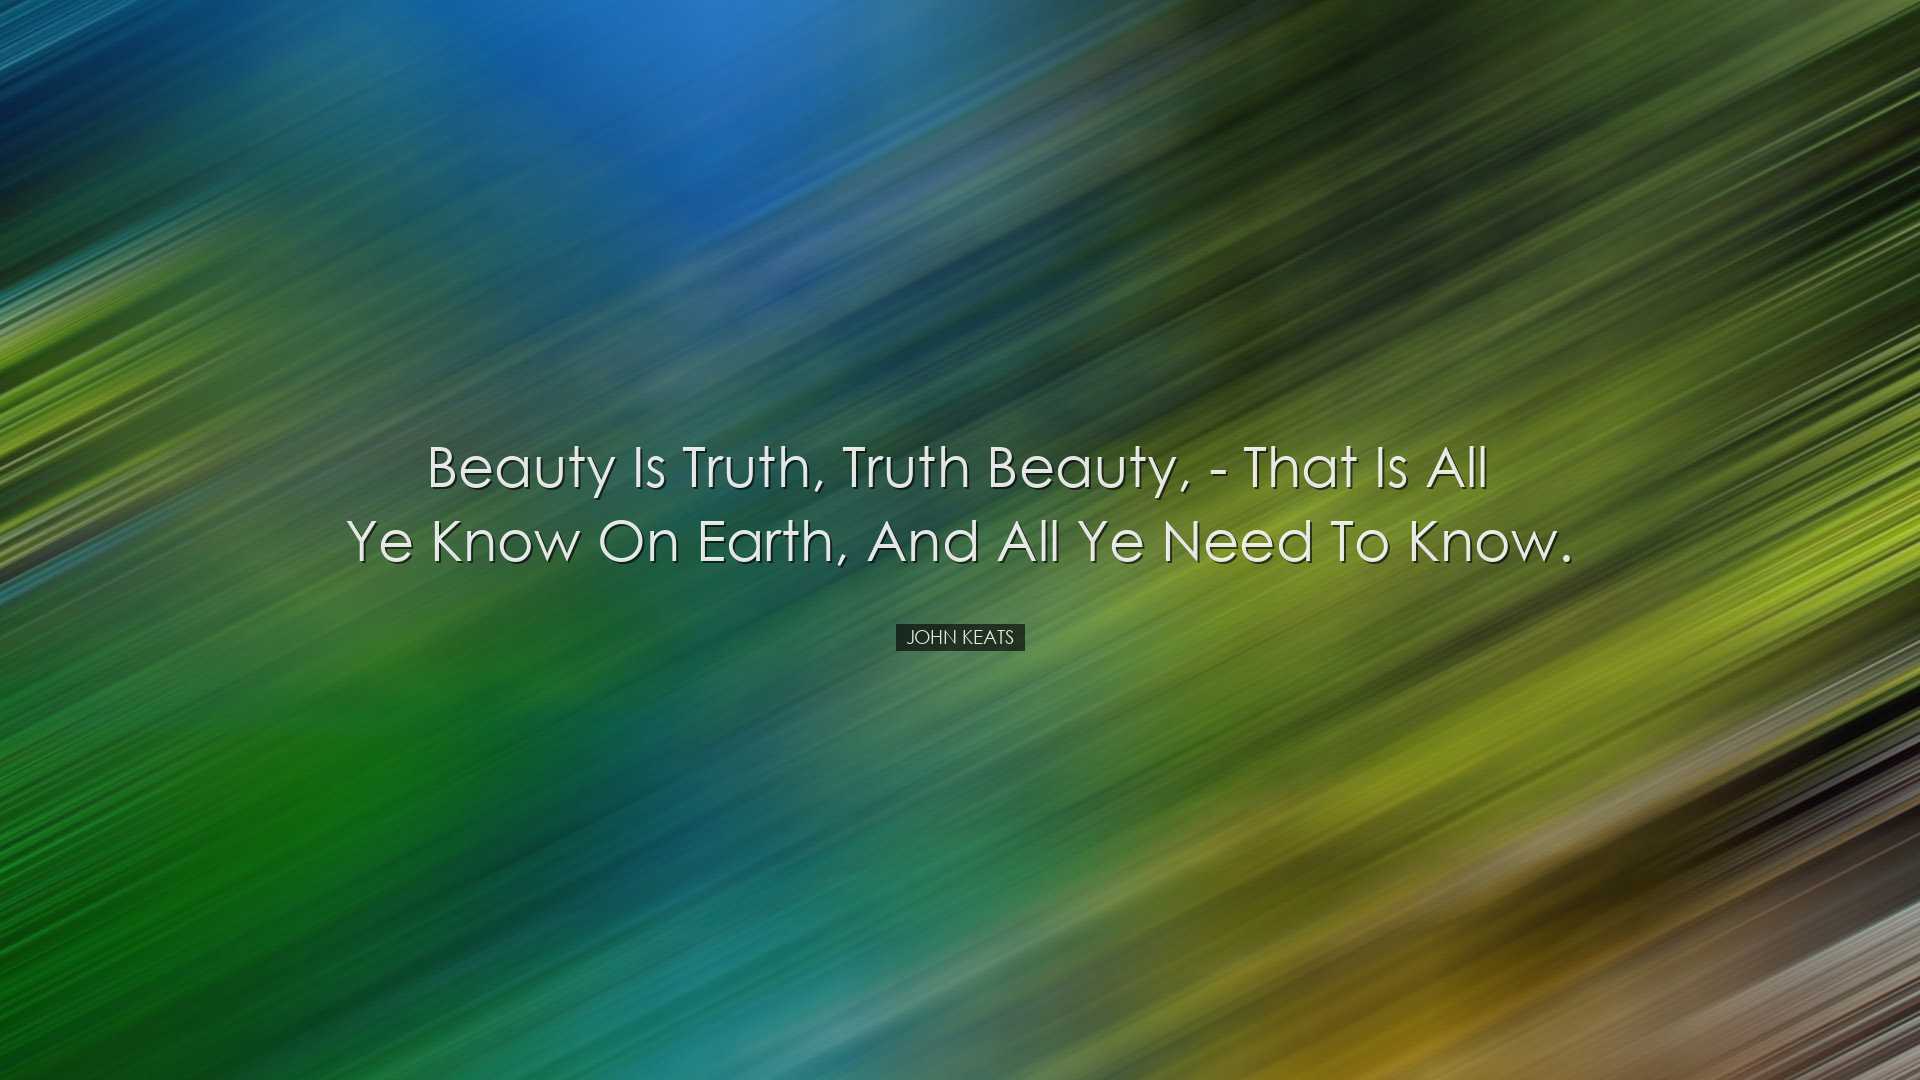 Beauty is truth, truth beauty, - that is all ye know on earth, and